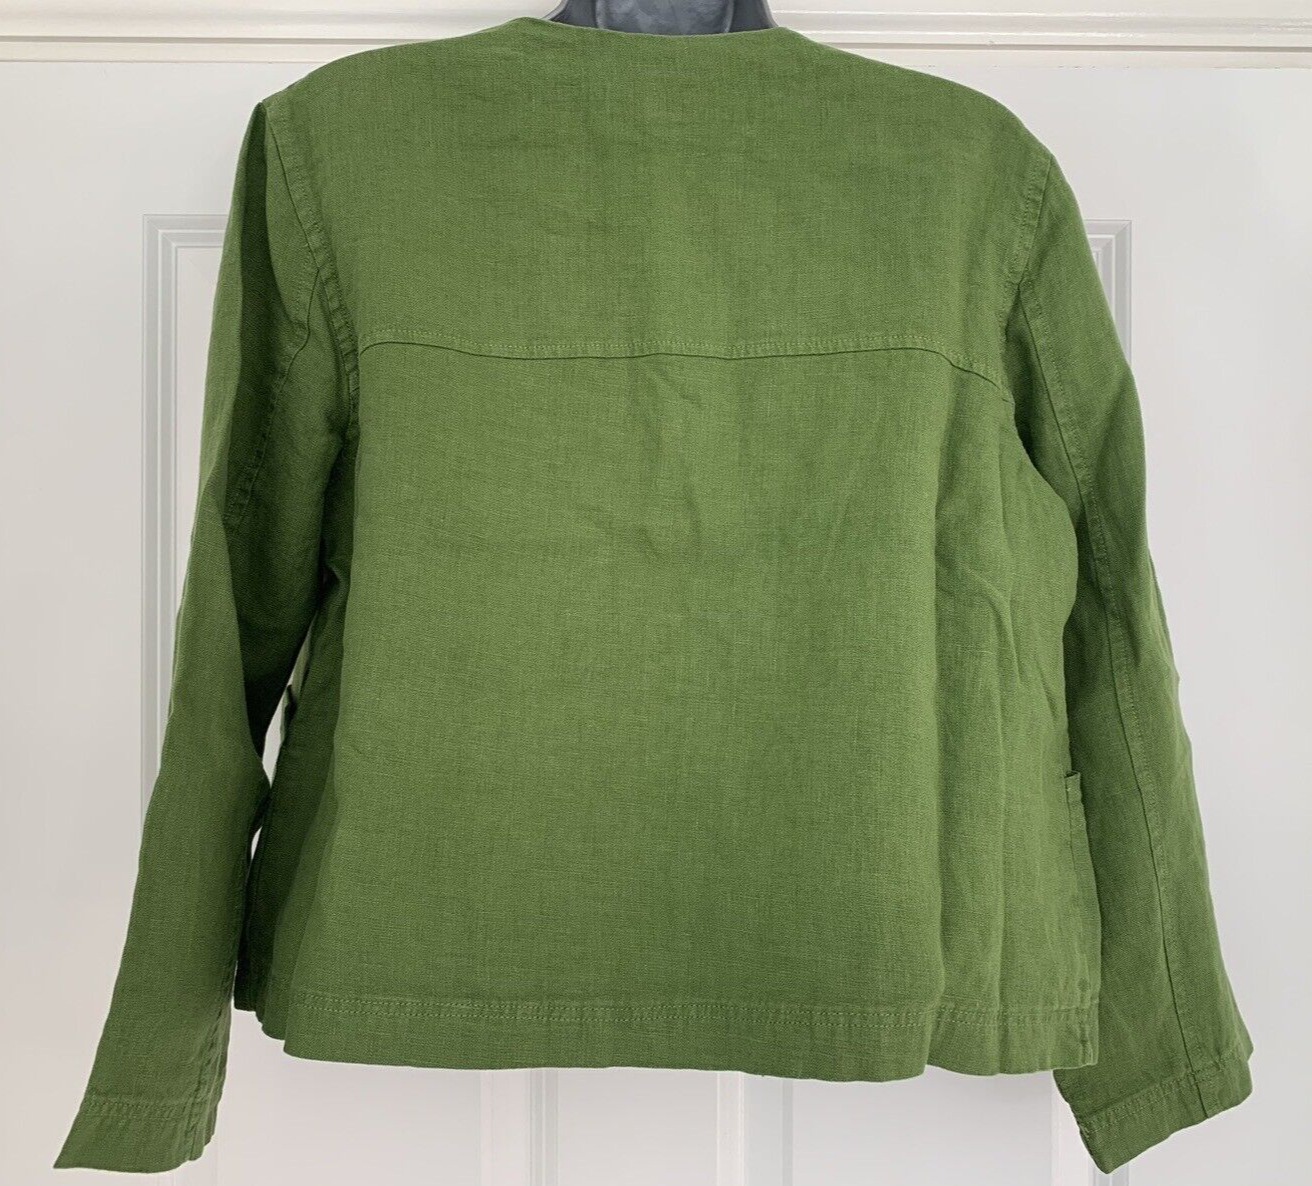 EX Seasalt Jacket Green Country House Linen Jacket Spring Grass 10-28 RRP £75